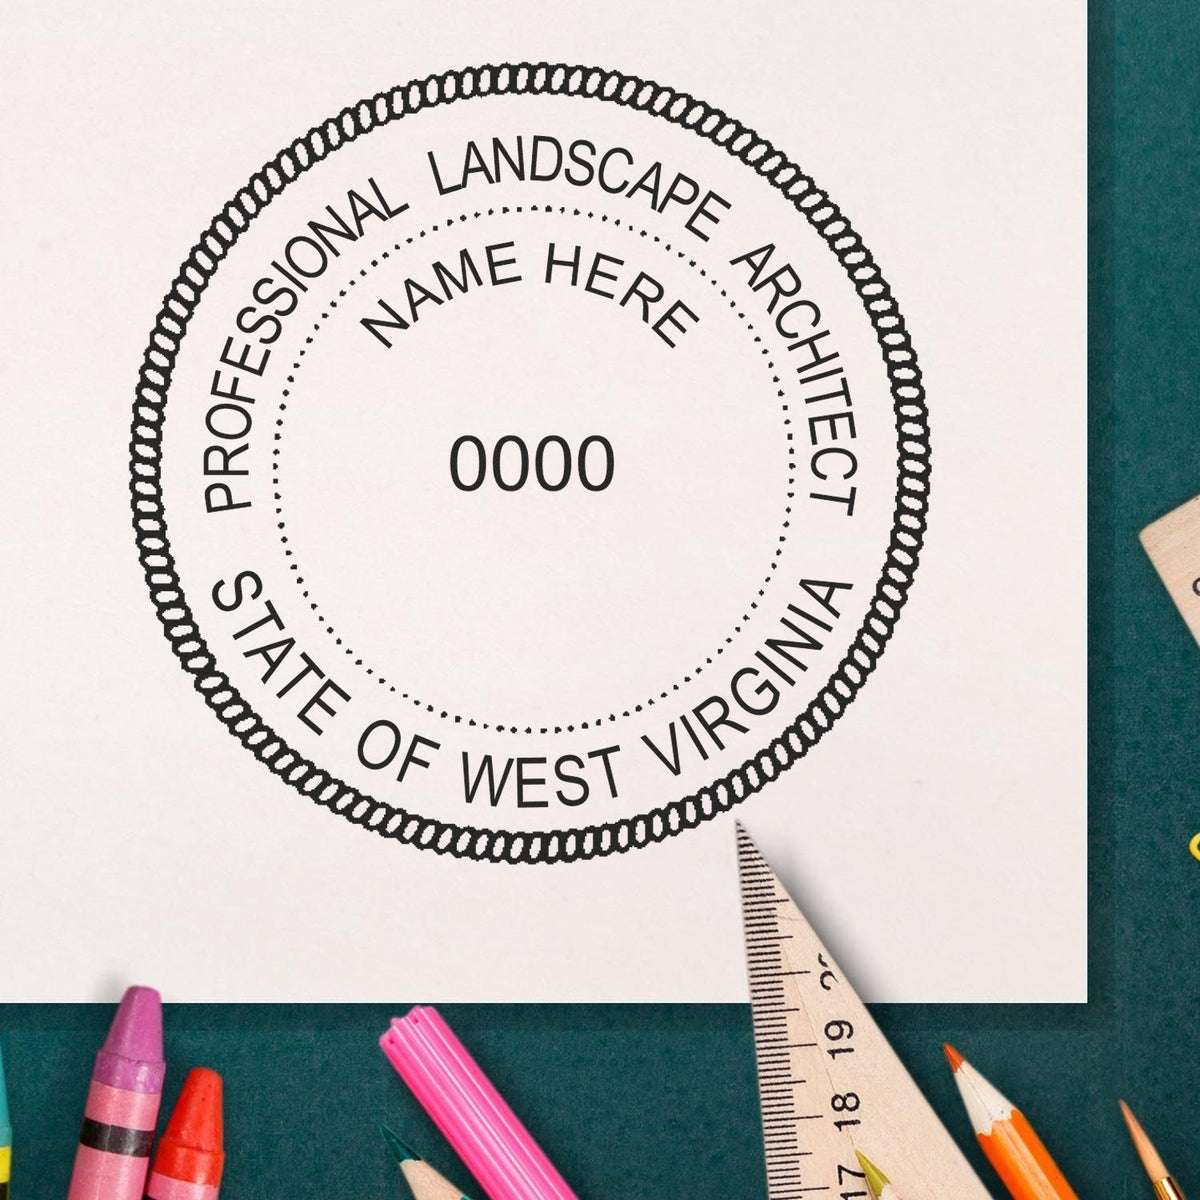 A photograph of the Self-Inking West Virginia Landscape Architect Stamp stamp impression reveals a vivid, professional image of the on paper.